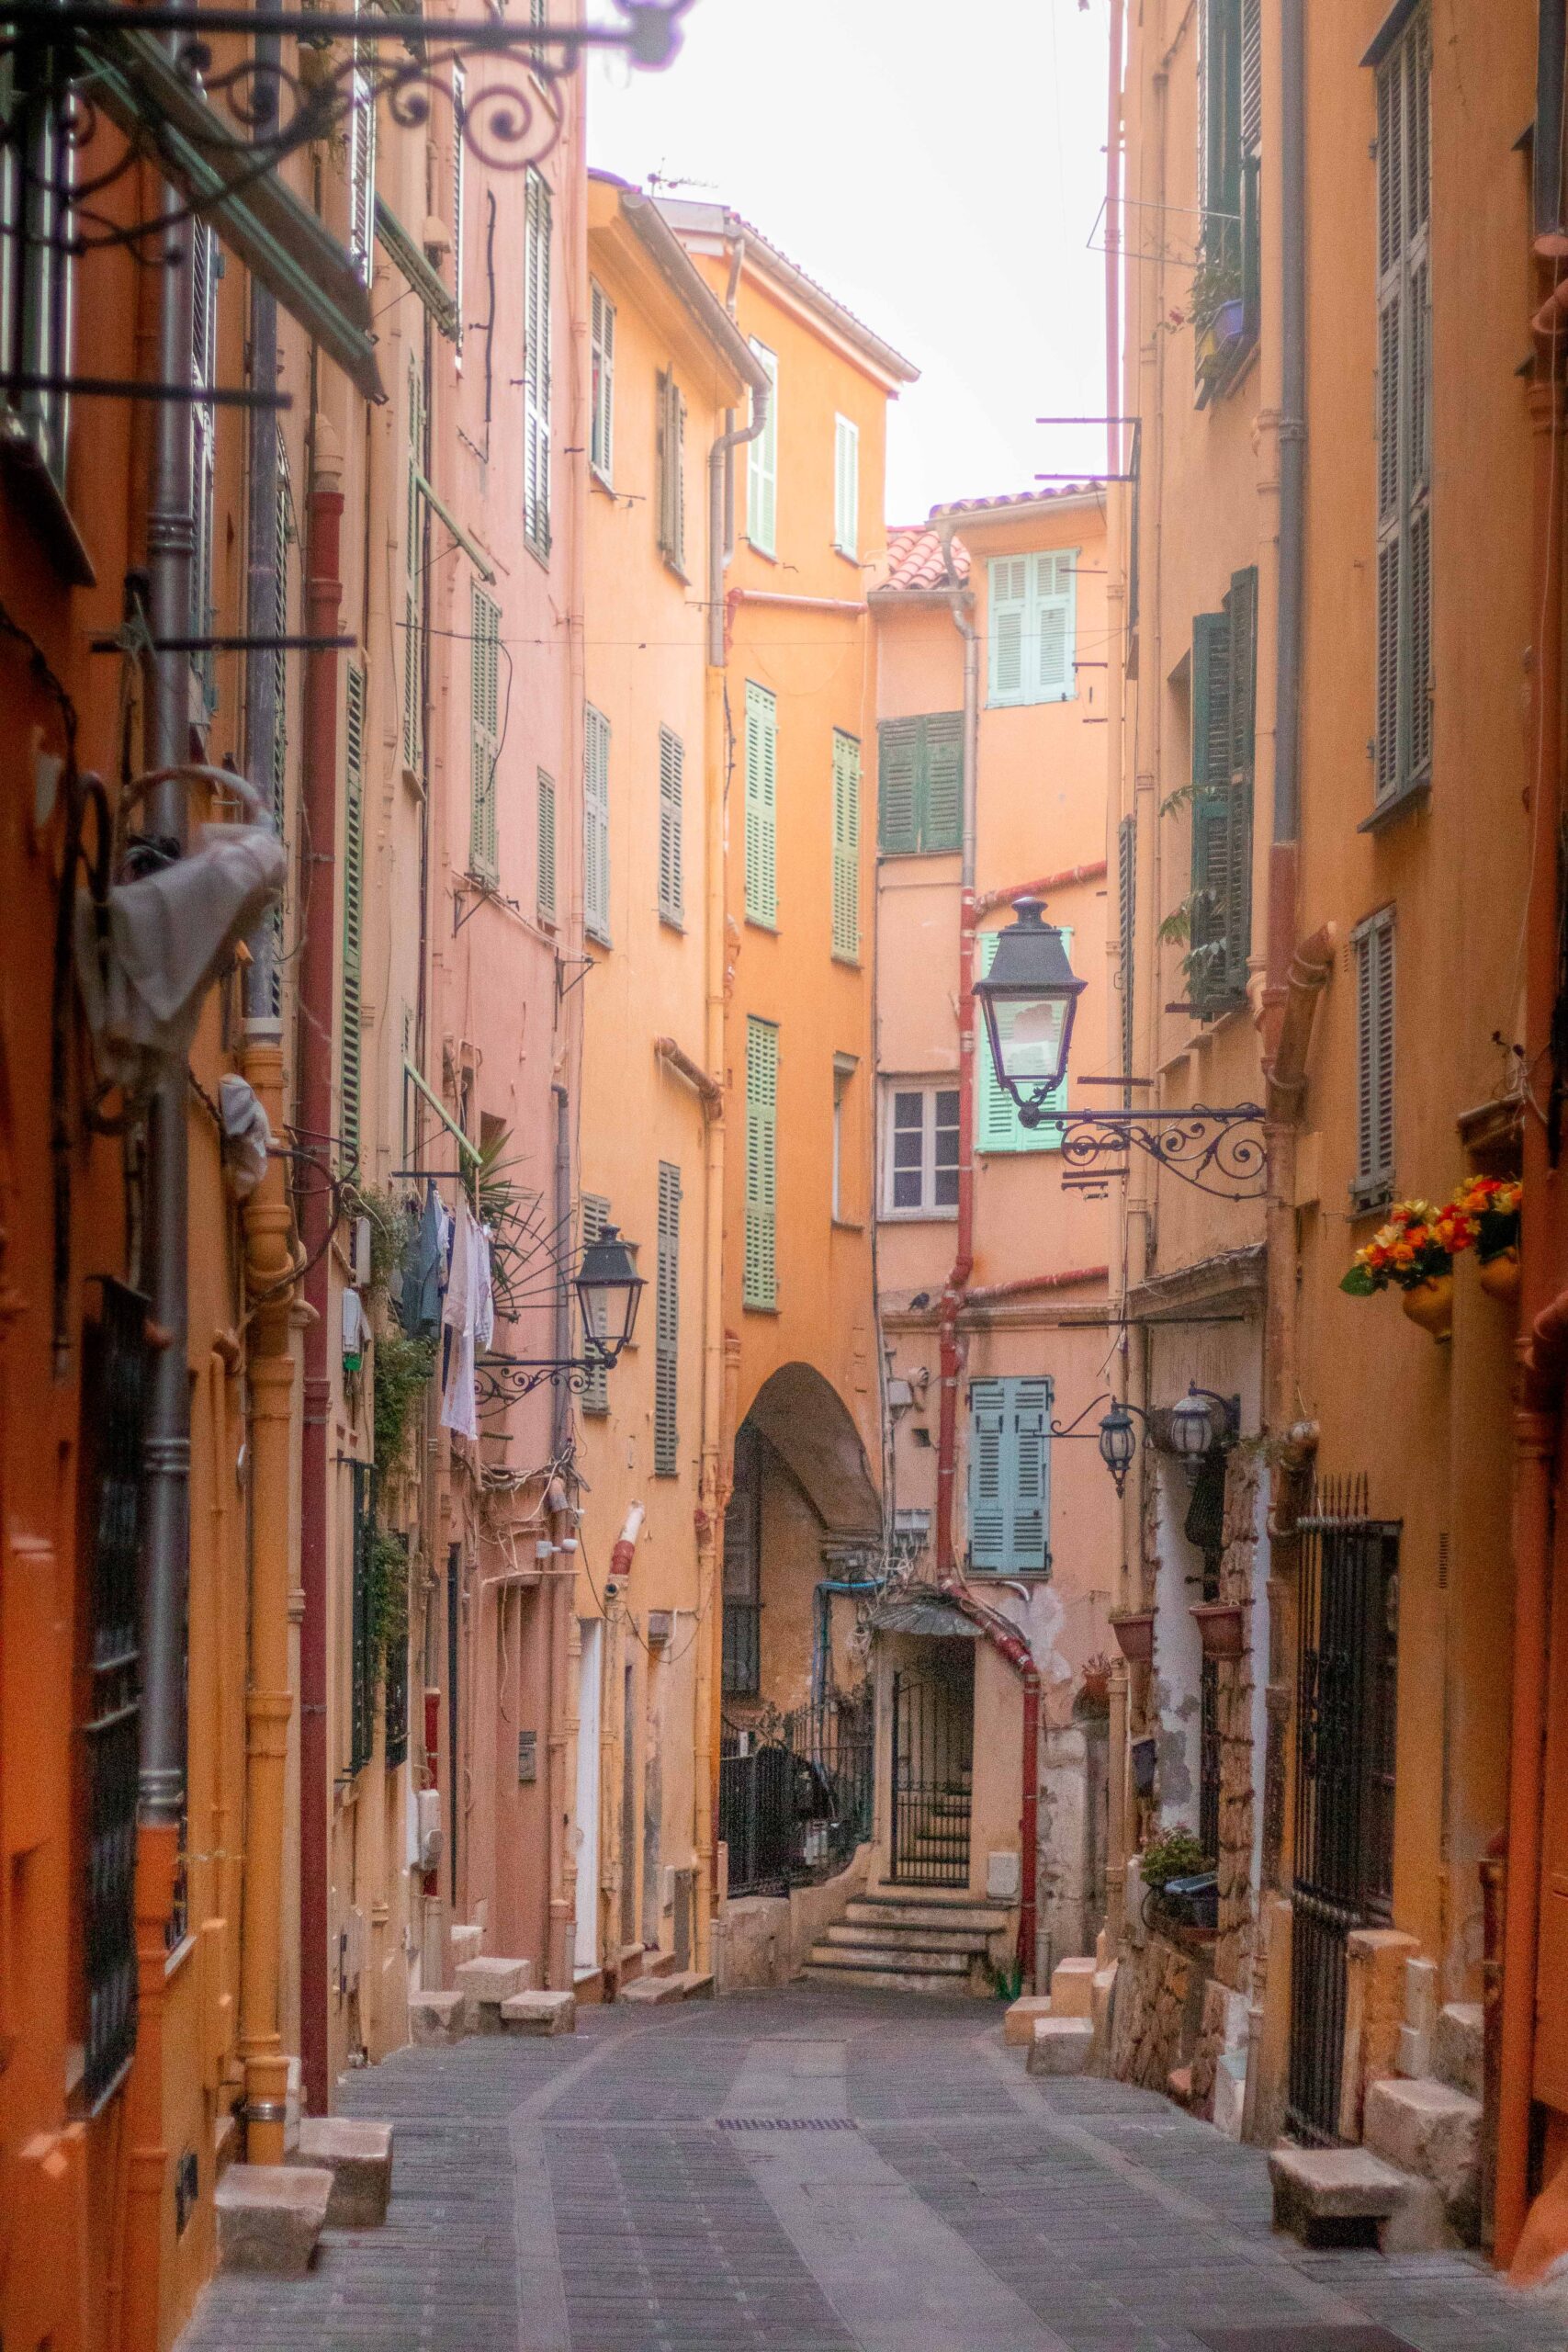 Colourful narrow street ("Rue Longue"), featuring orange, yellow and pink facades and painted blind windows in the Old Town of Menton, France